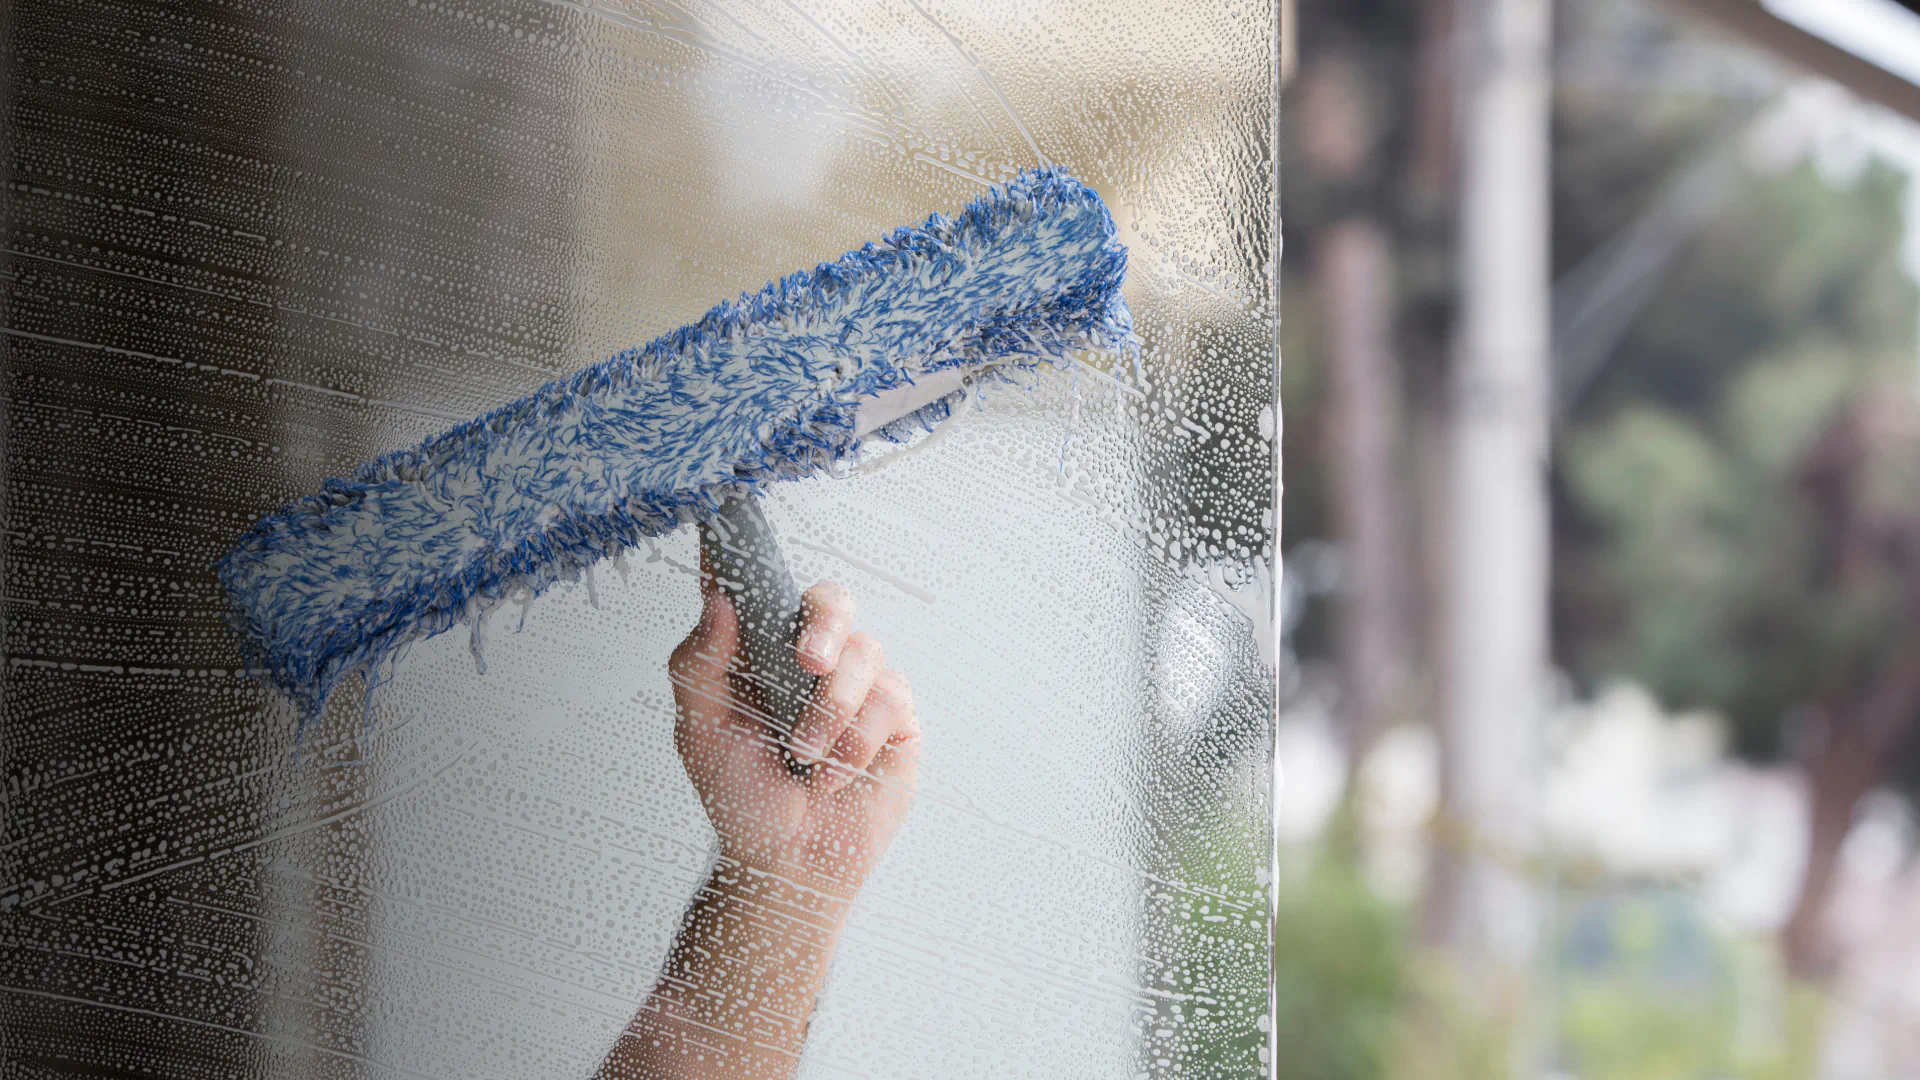 window cleaning services in a residential house